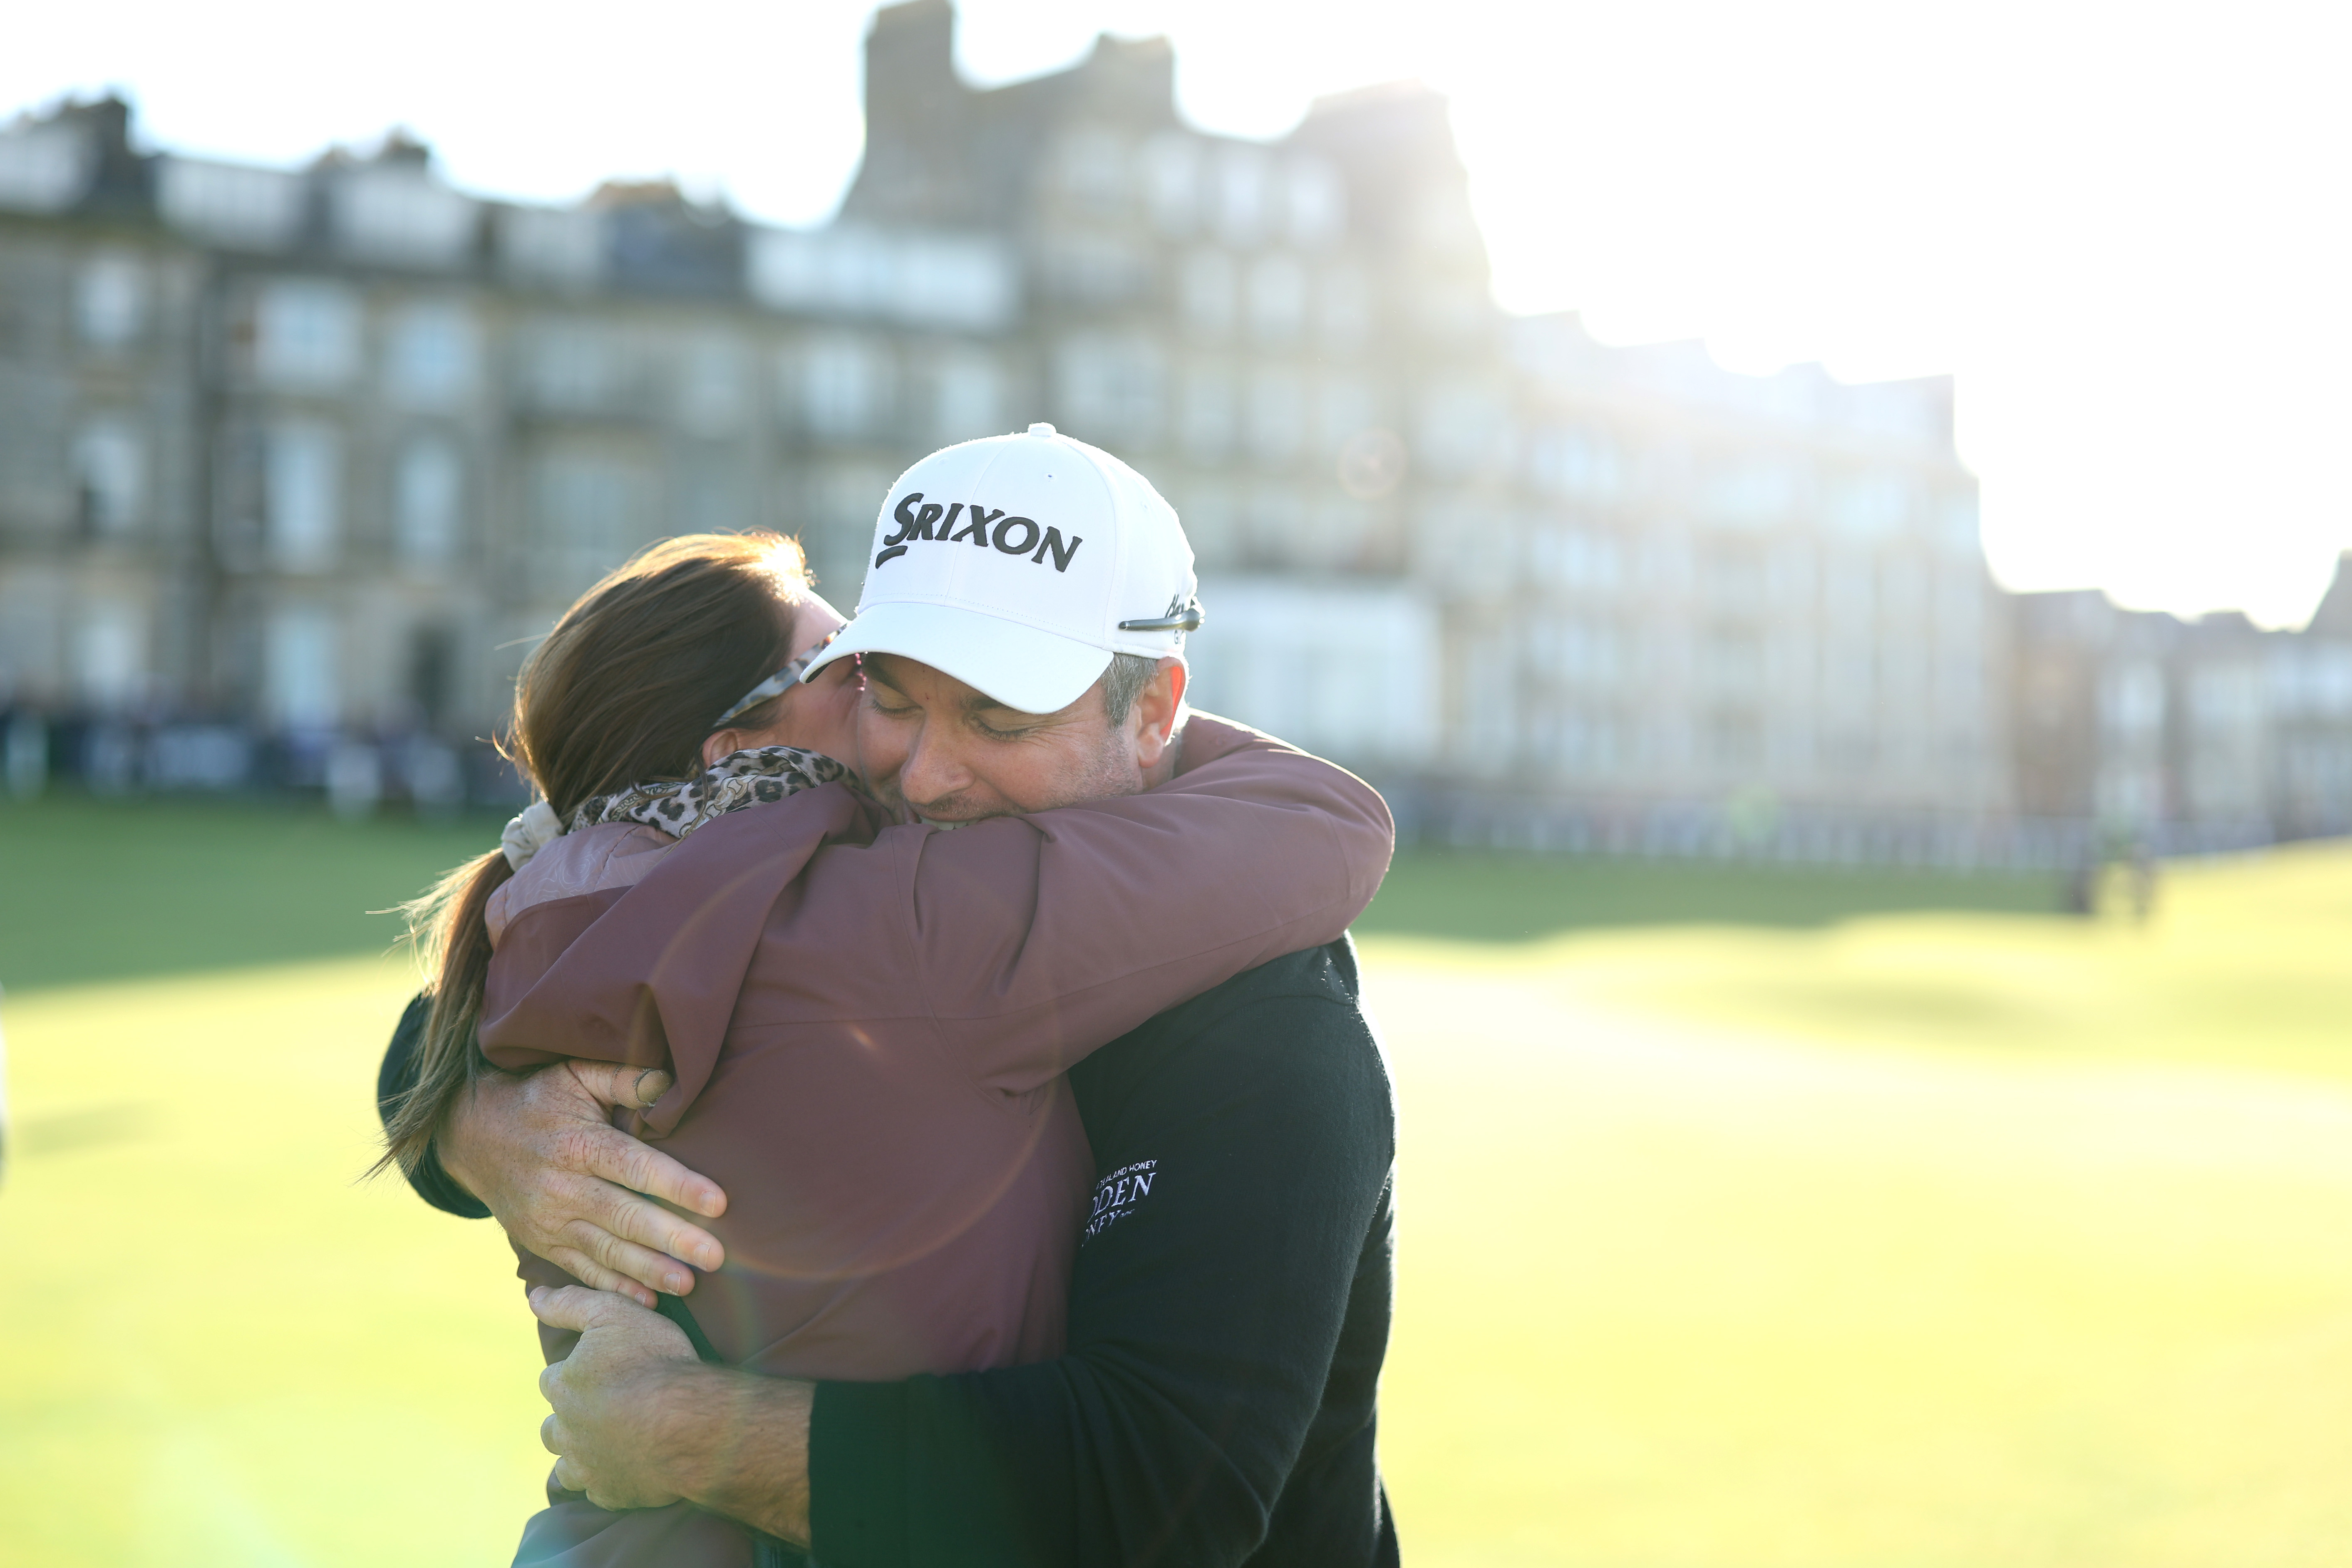 Ryan Fox of New Zealand embraces his wife, Anneke, after winning the Alfred Dunhill Links Championship on the Old Course St. Andrews.